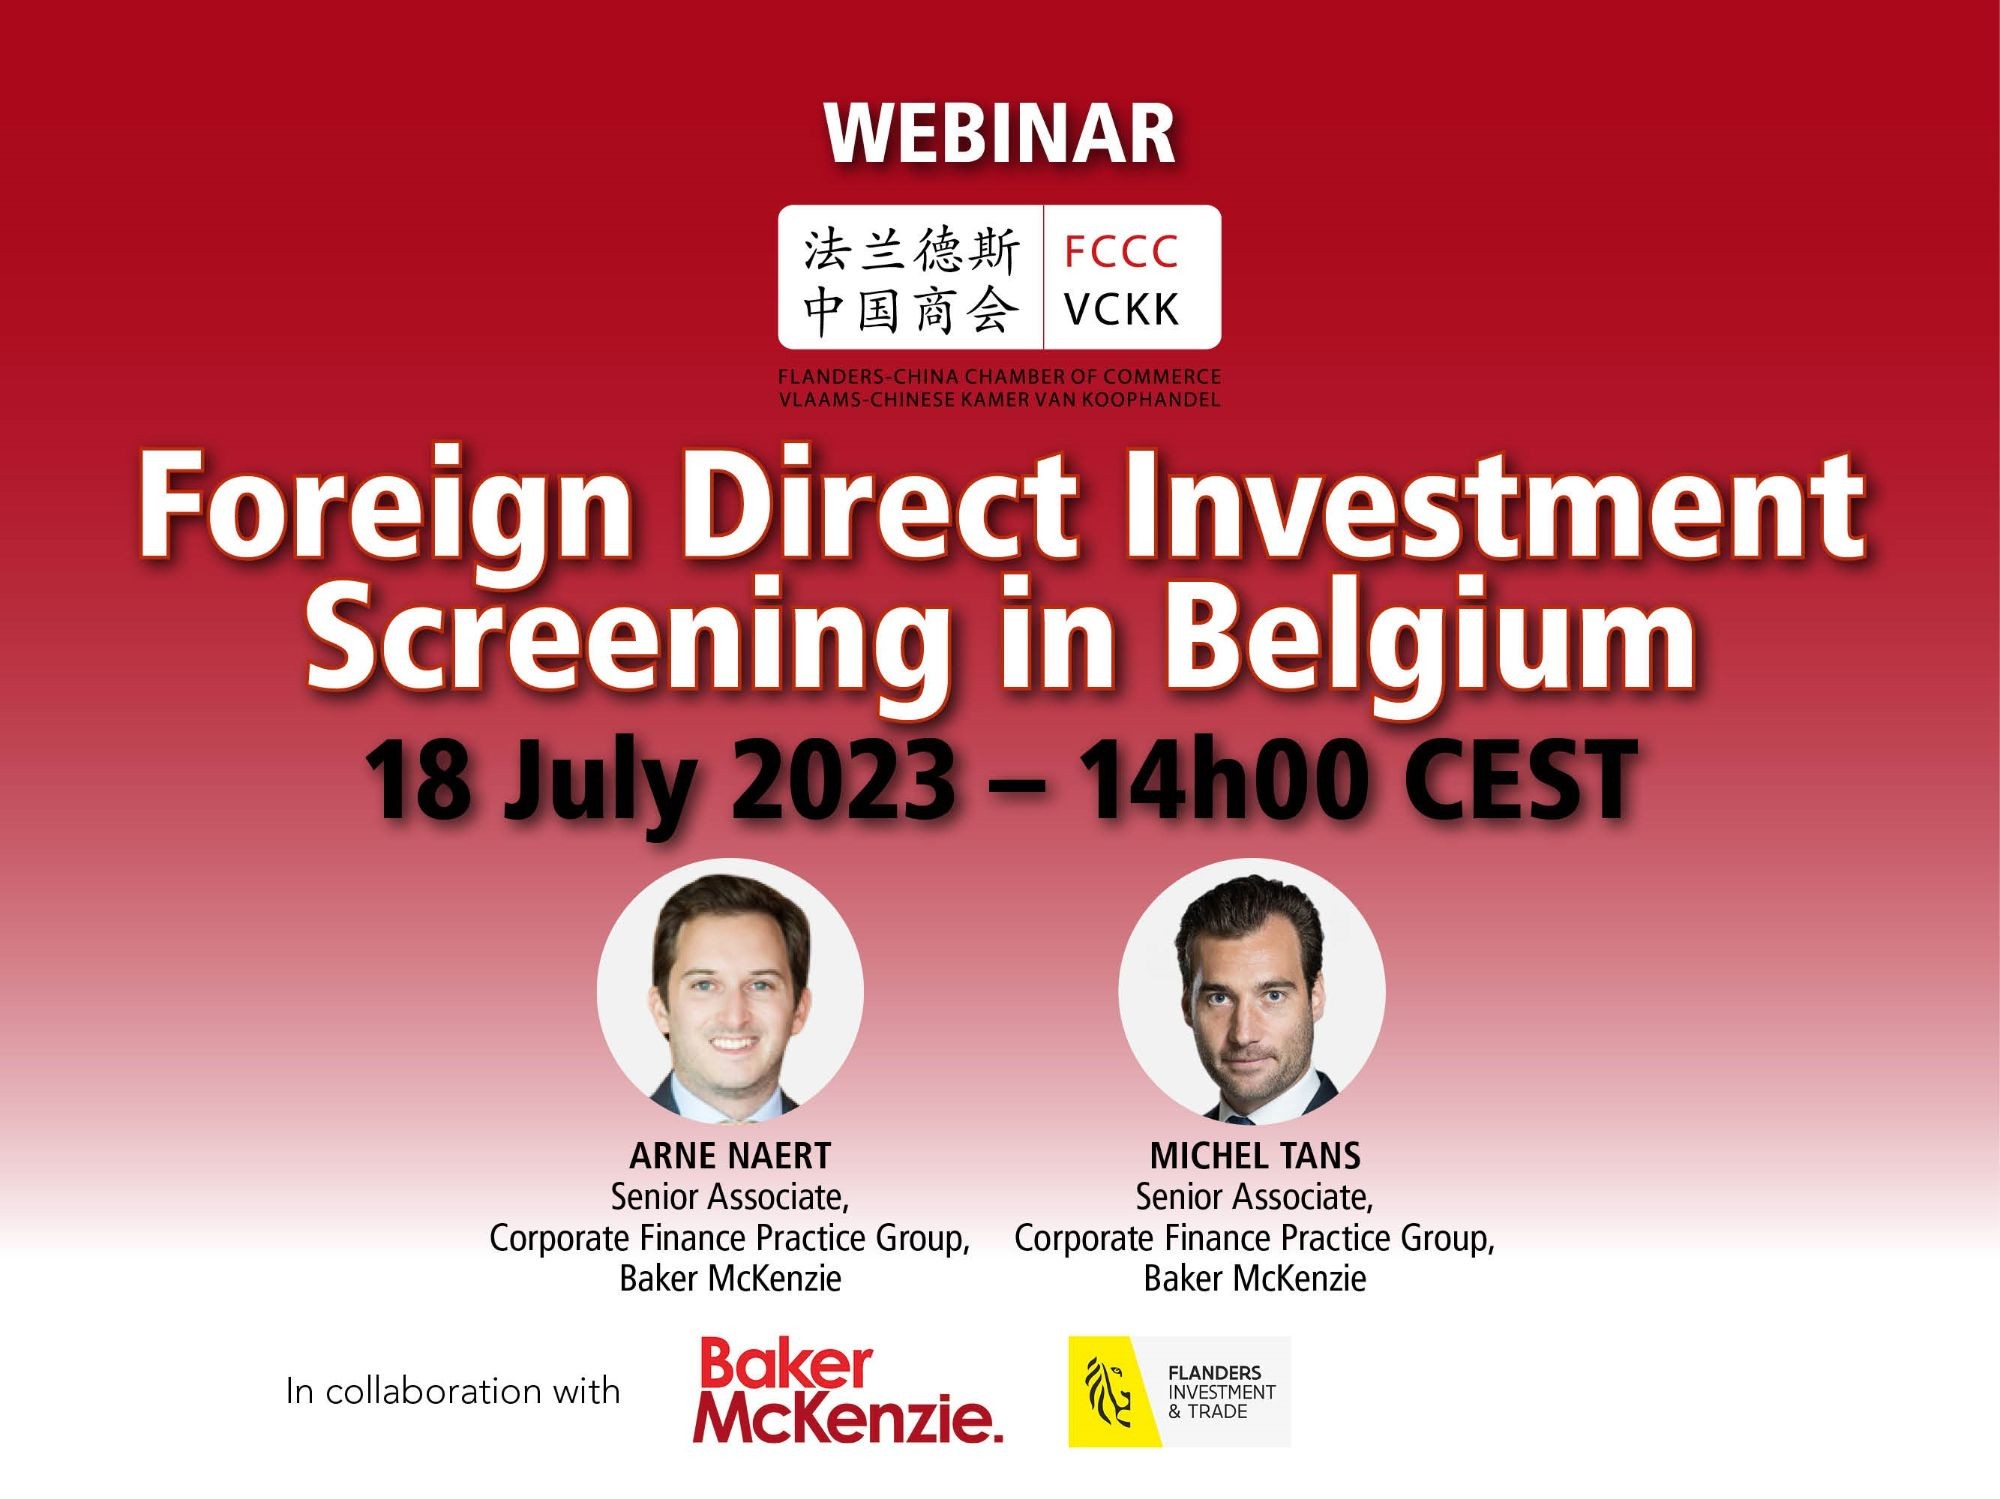 Webinar: Foreign Direct Investment Screening in Belgium - 18 July 2023 - 14h00 CEST